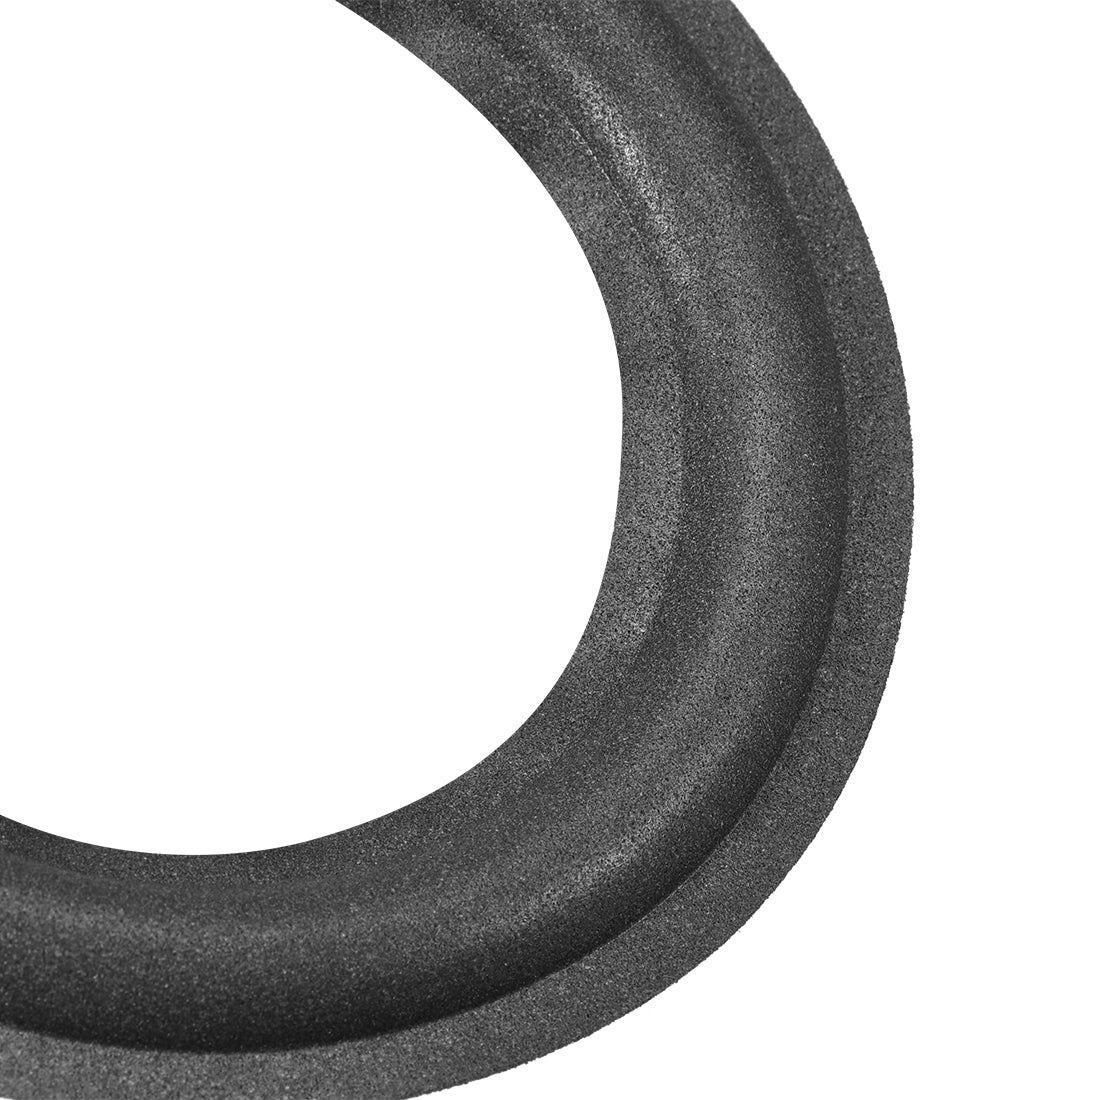 uxcell Uxcell 4.5" 4.5 inch Speaker Foam Edge Surround Rings Replacement Parts for Speaker Repair or DIY 4pcs